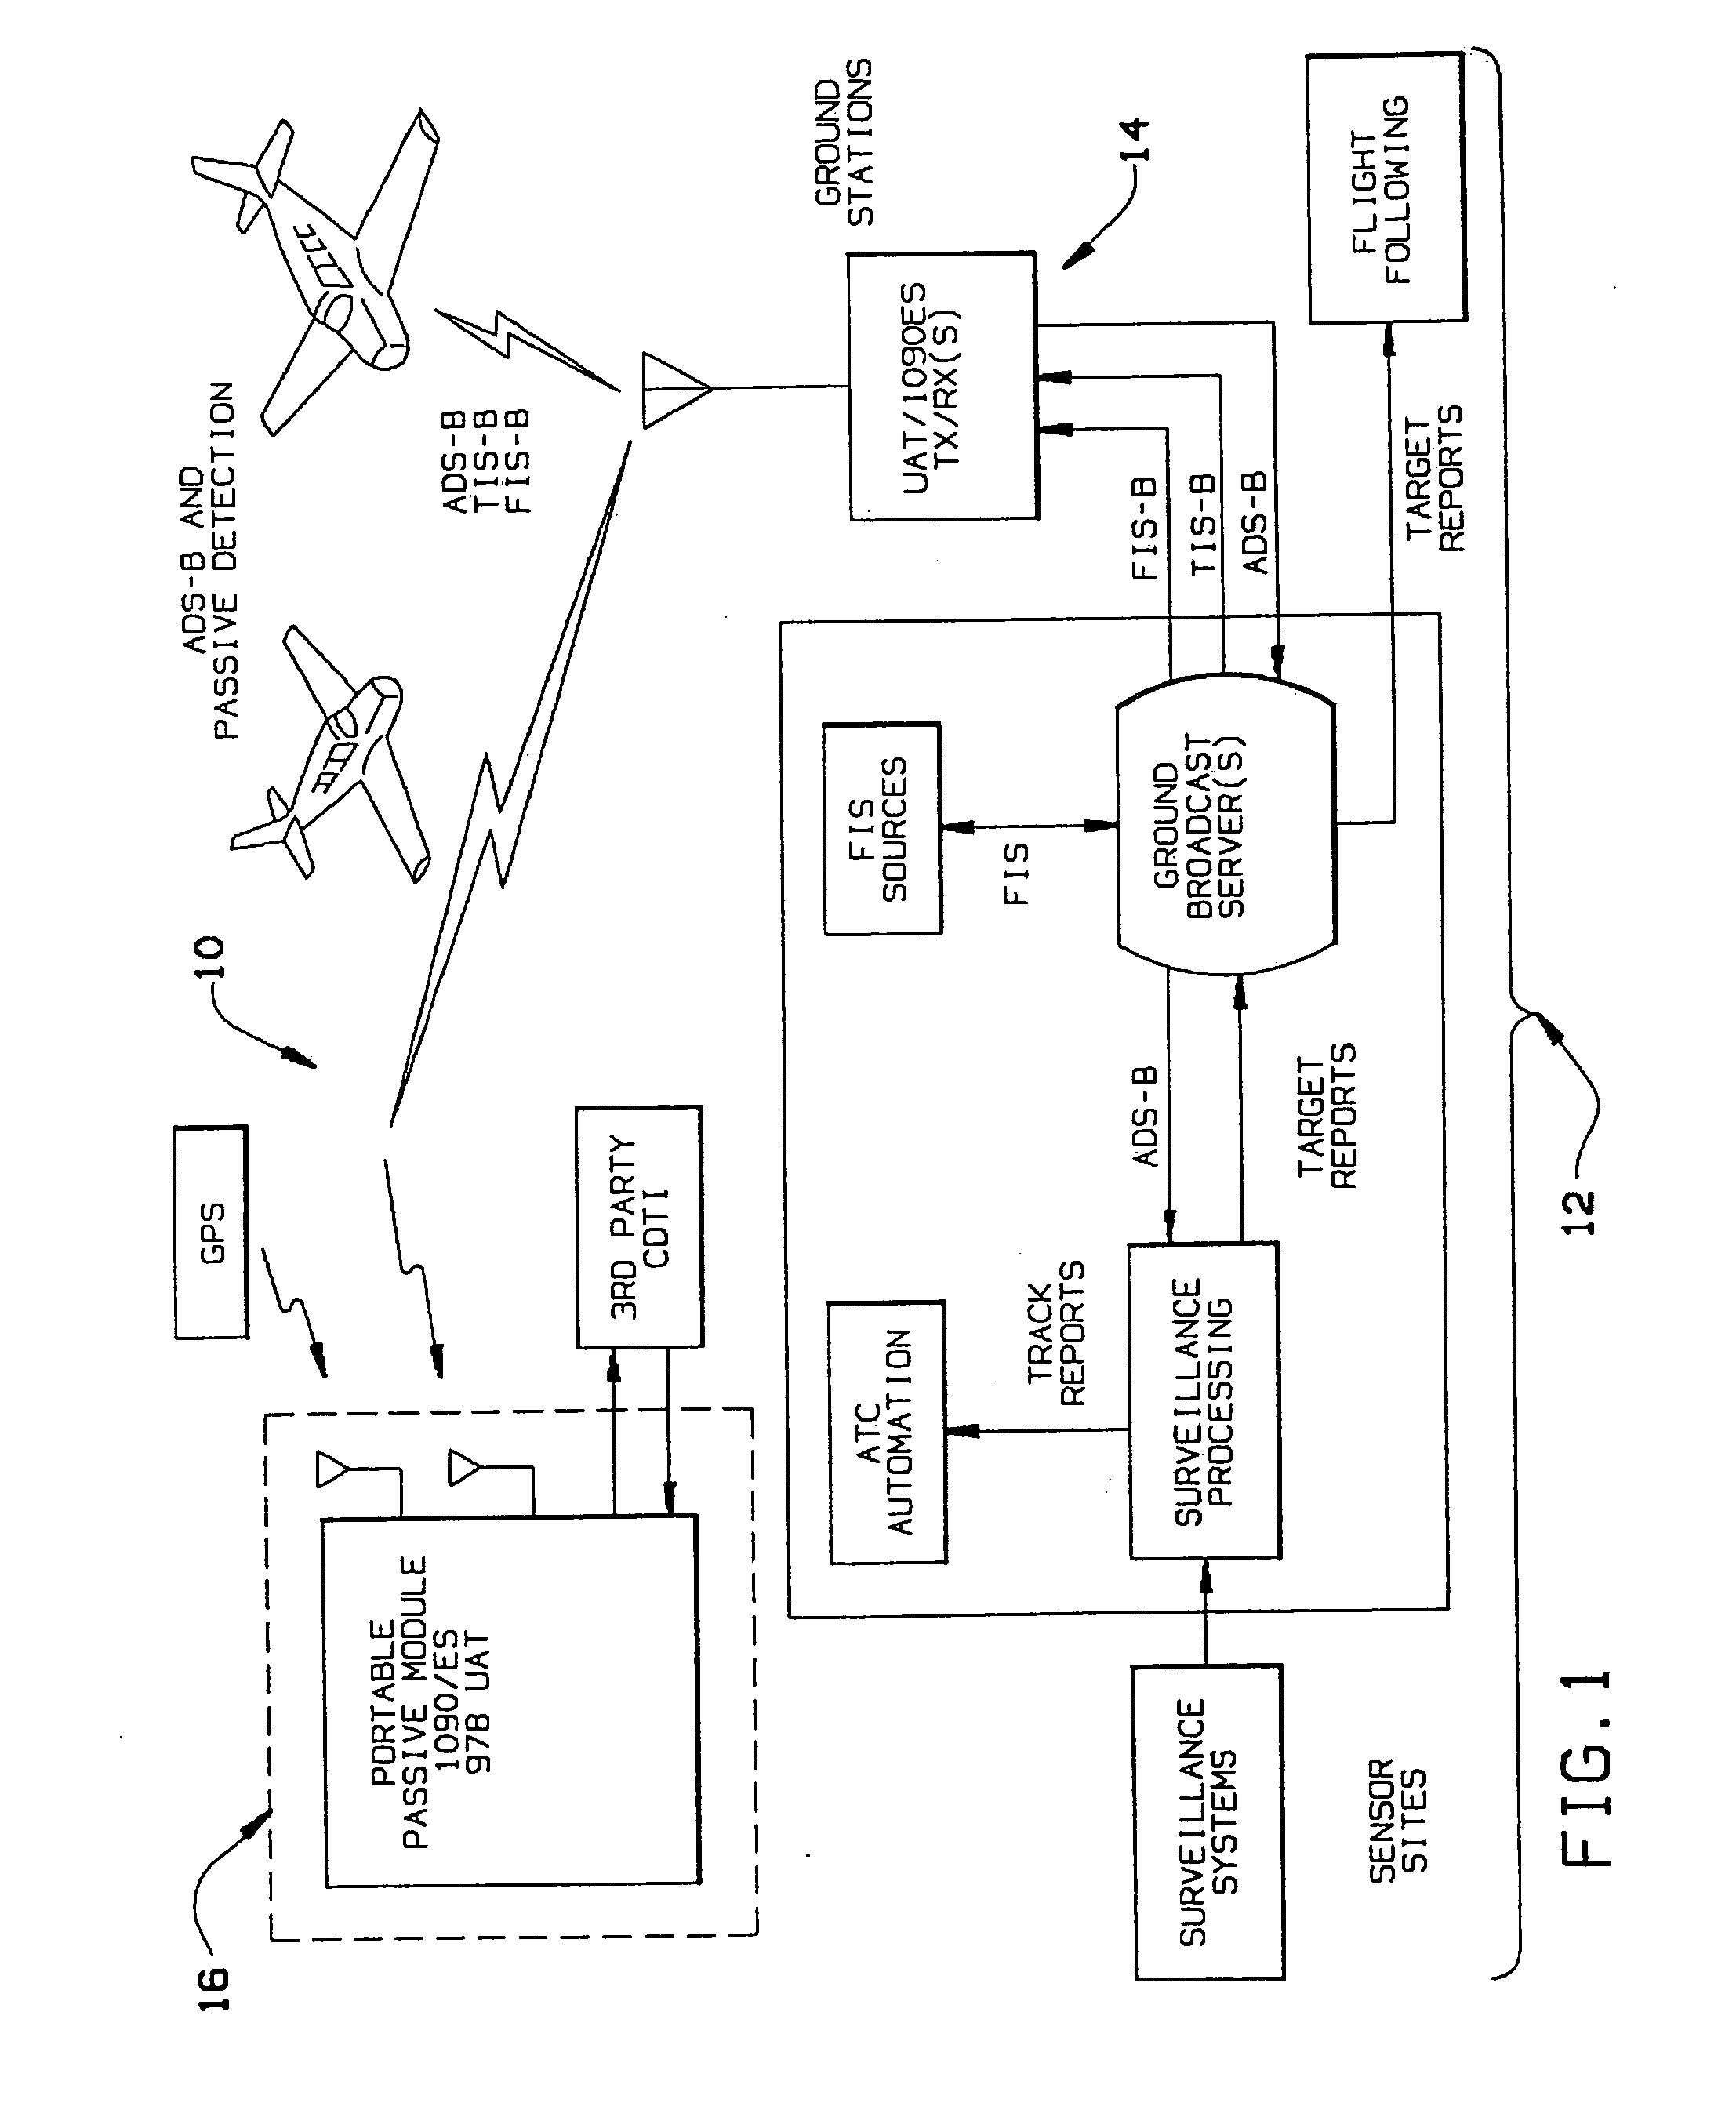 Automatic dependant surveillance systems and methods